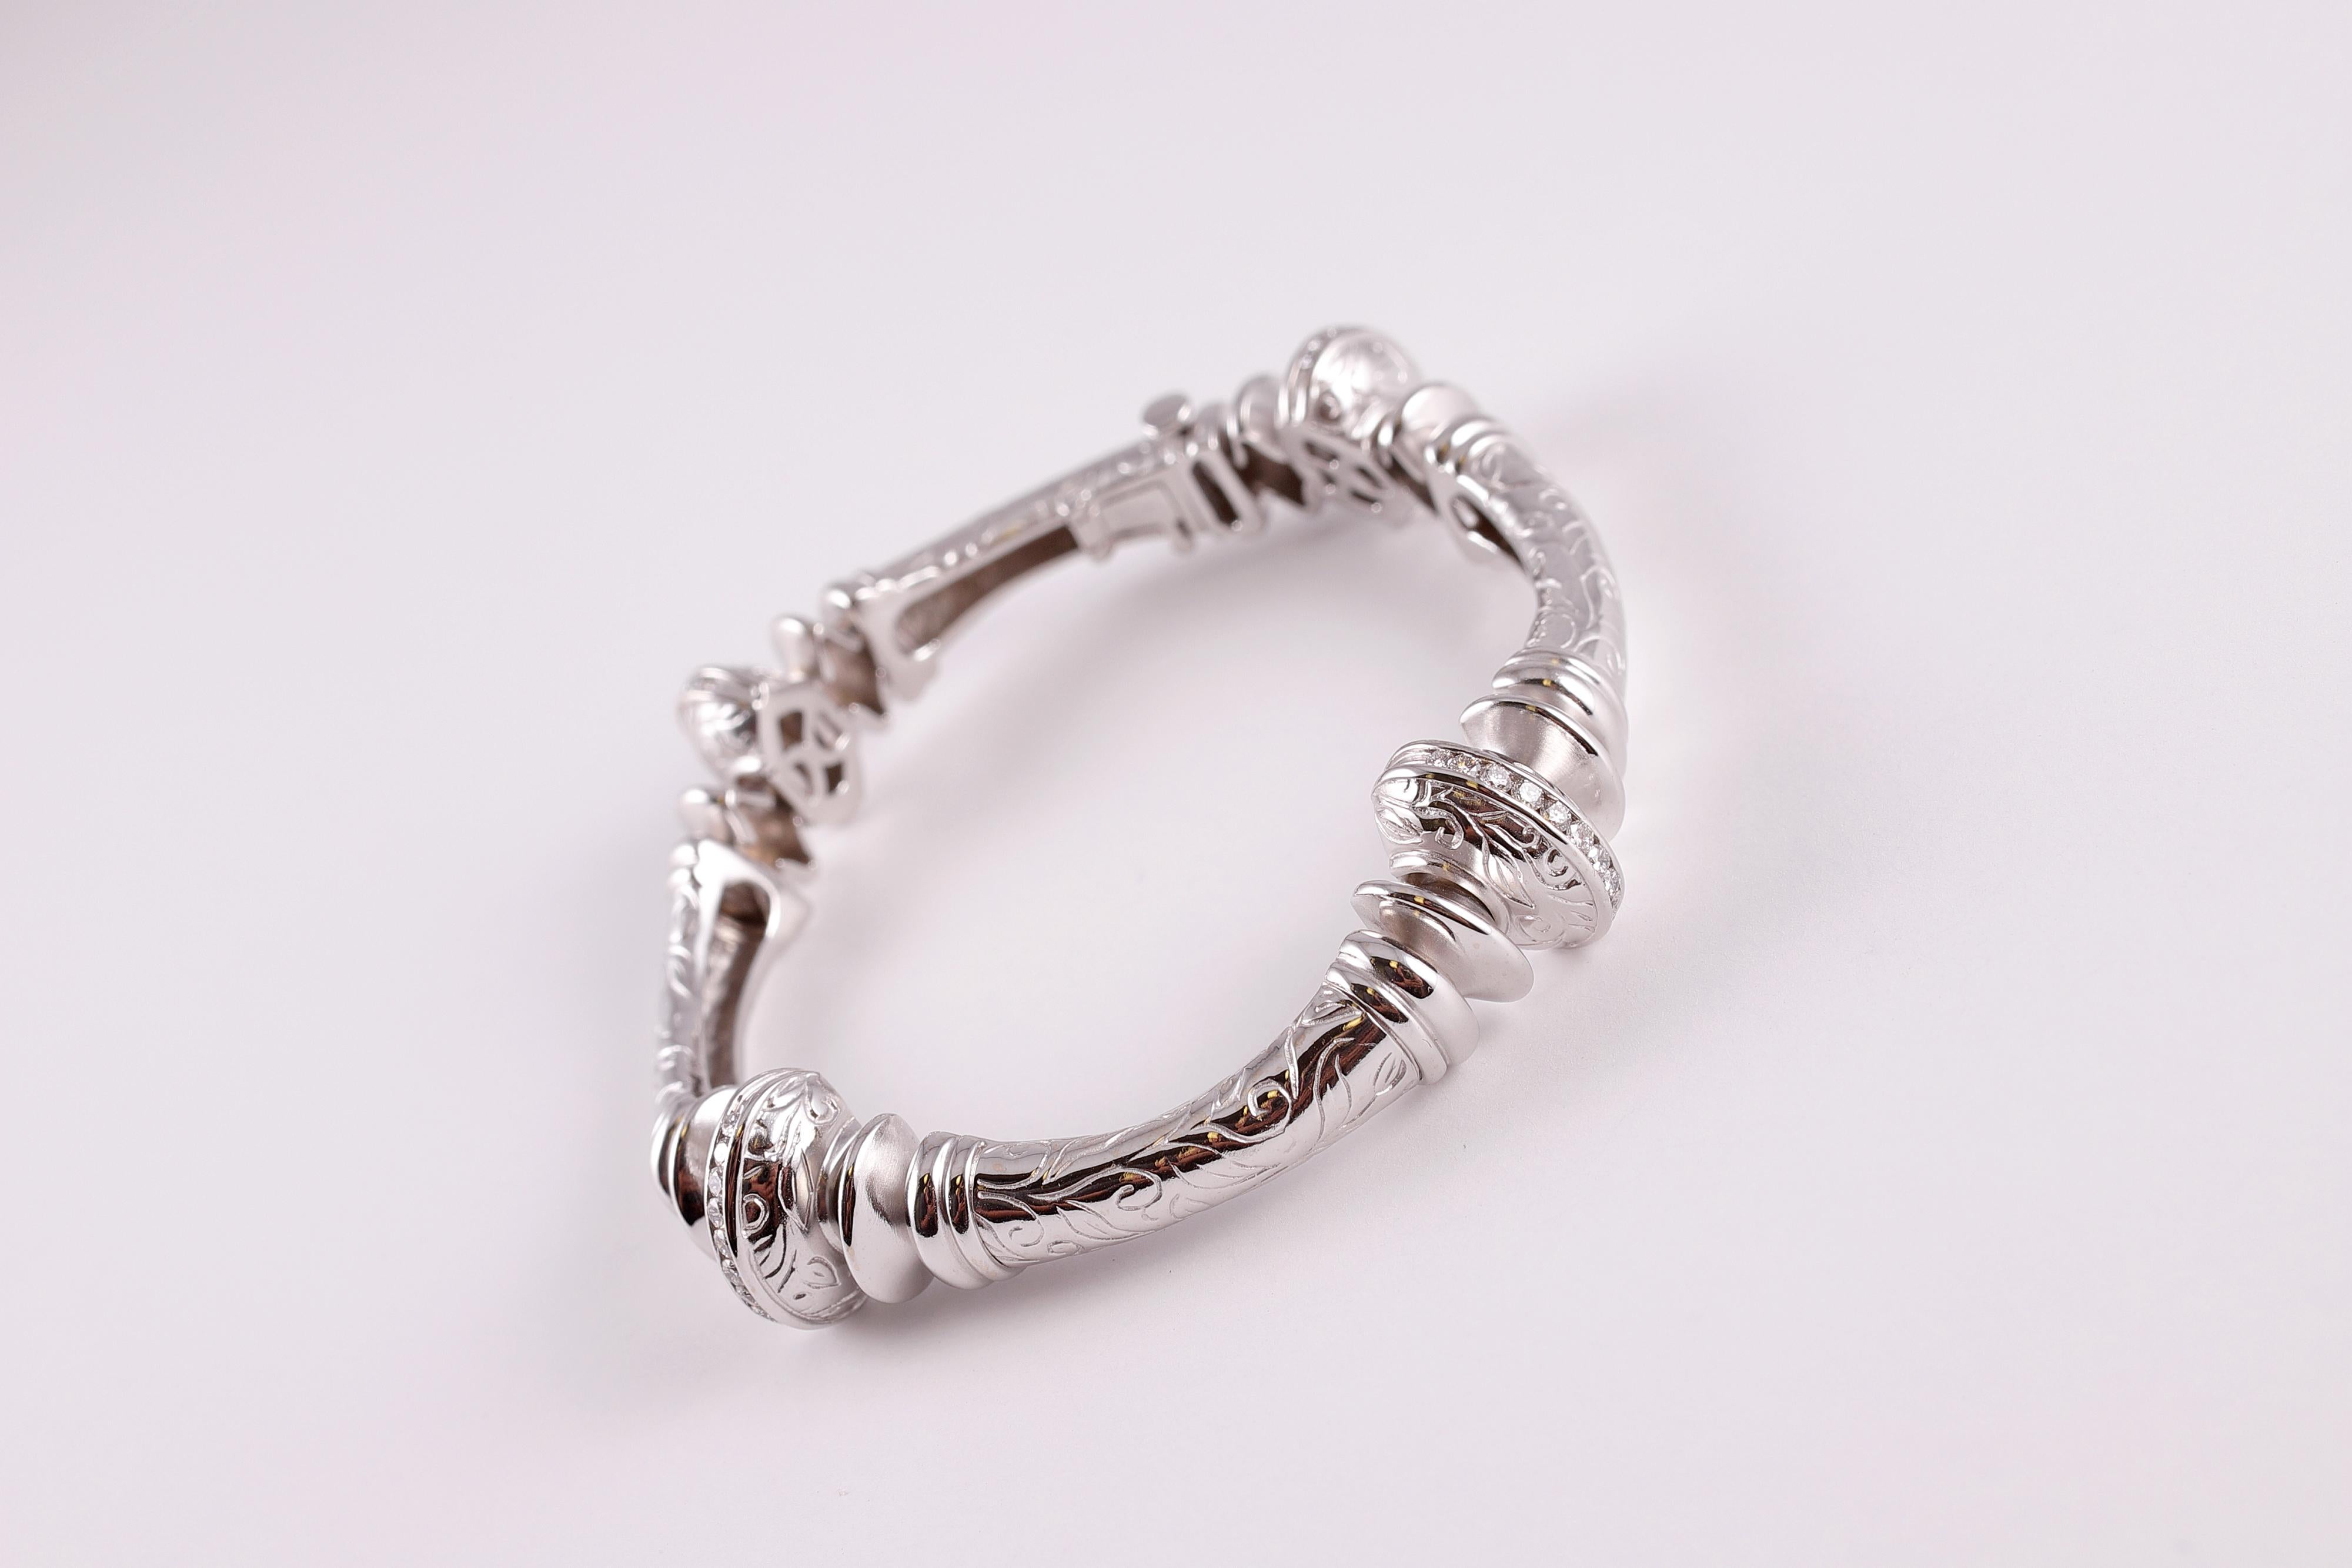 White Gold Diamond Bracelet by Seidengang from the Laurel Collection 2